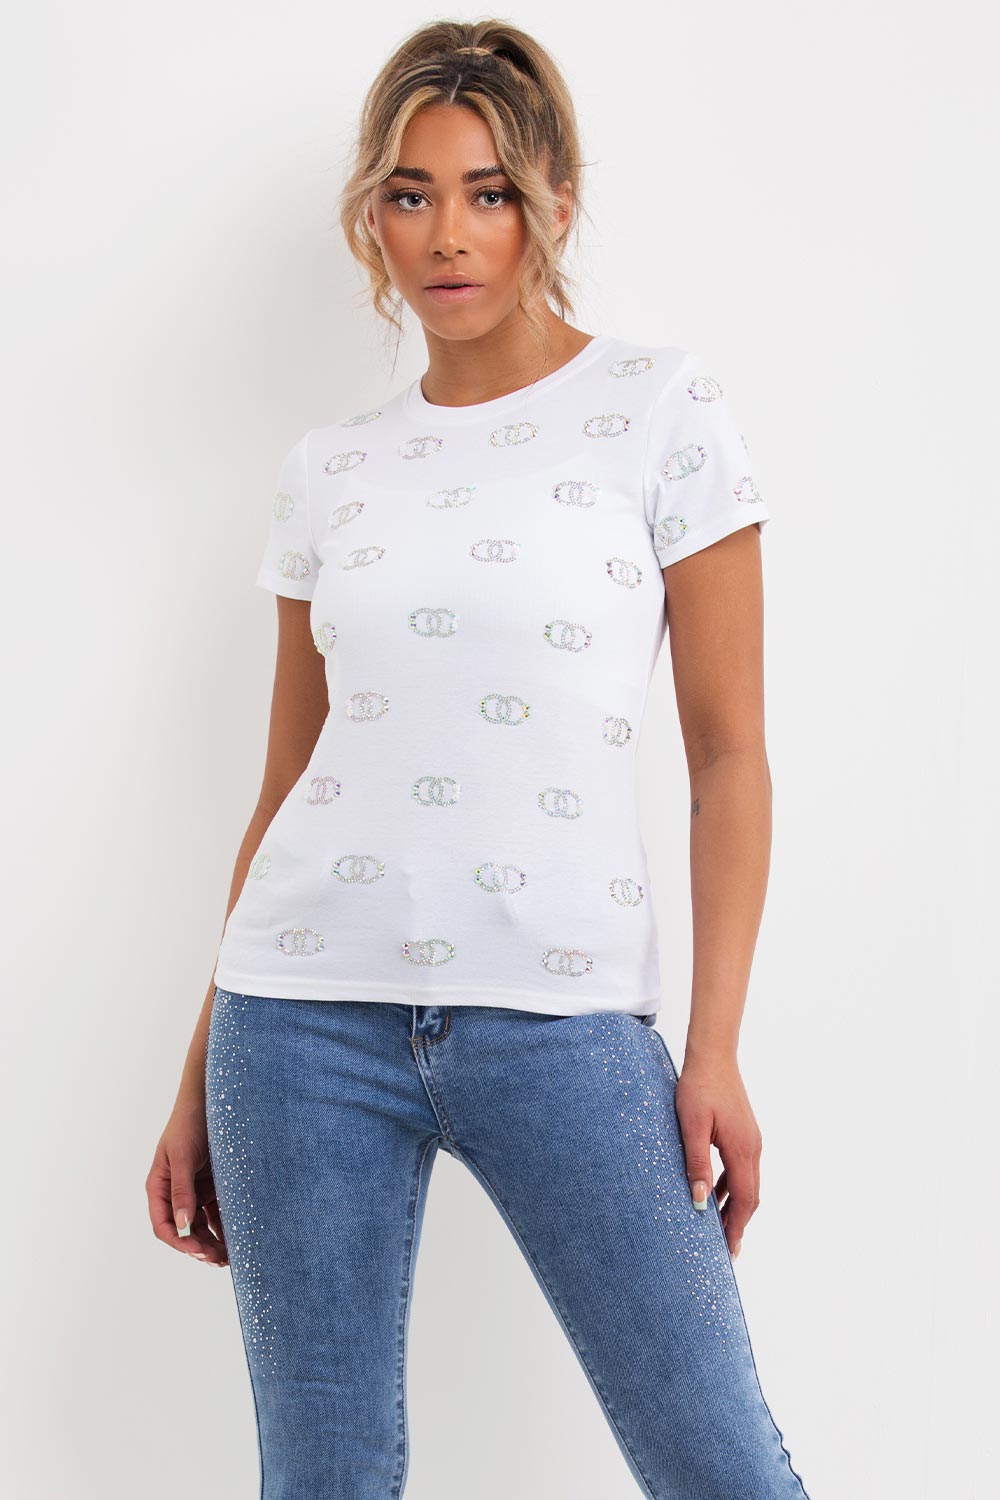 Jeans And Nice Top – Styledup.co.uk